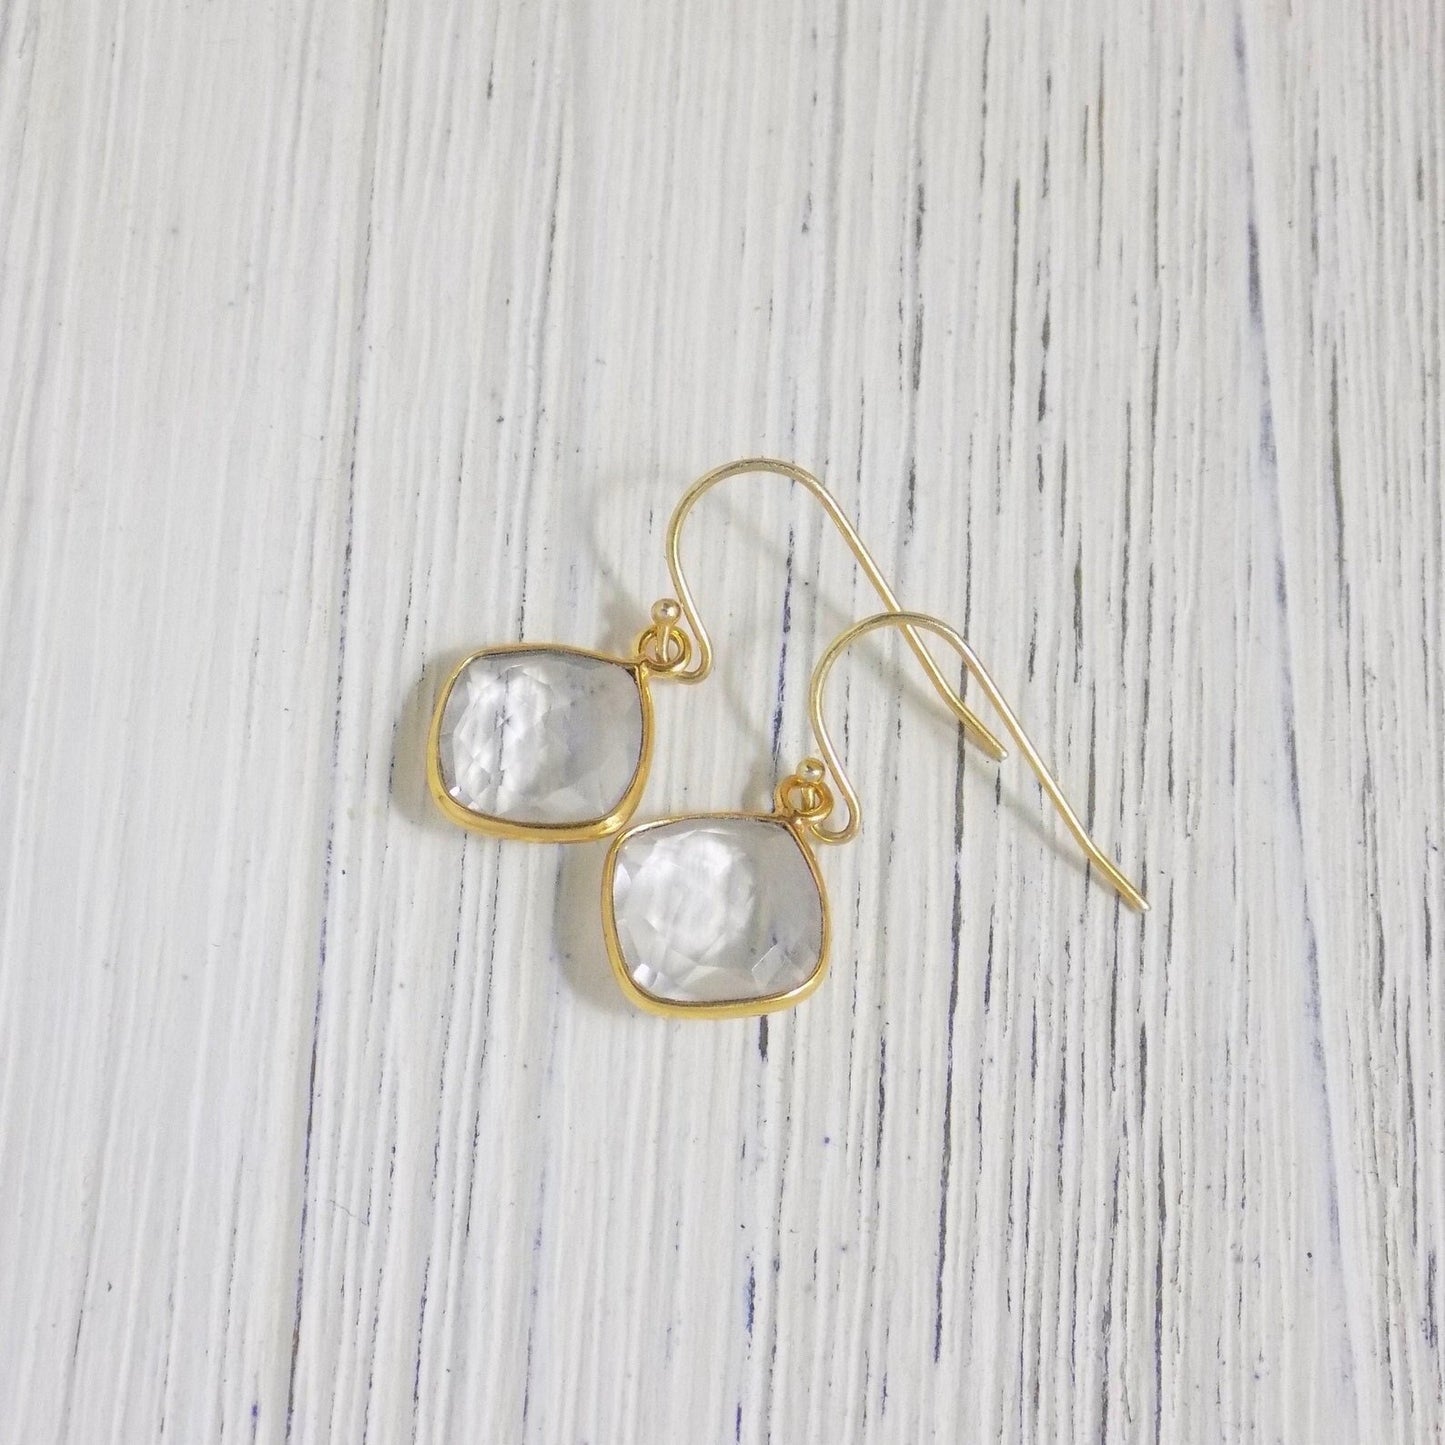 Valentines Day Gift, Minimalist Clear Crystal Drop Earrings Gold Cushion Cut Faceted, M5-300